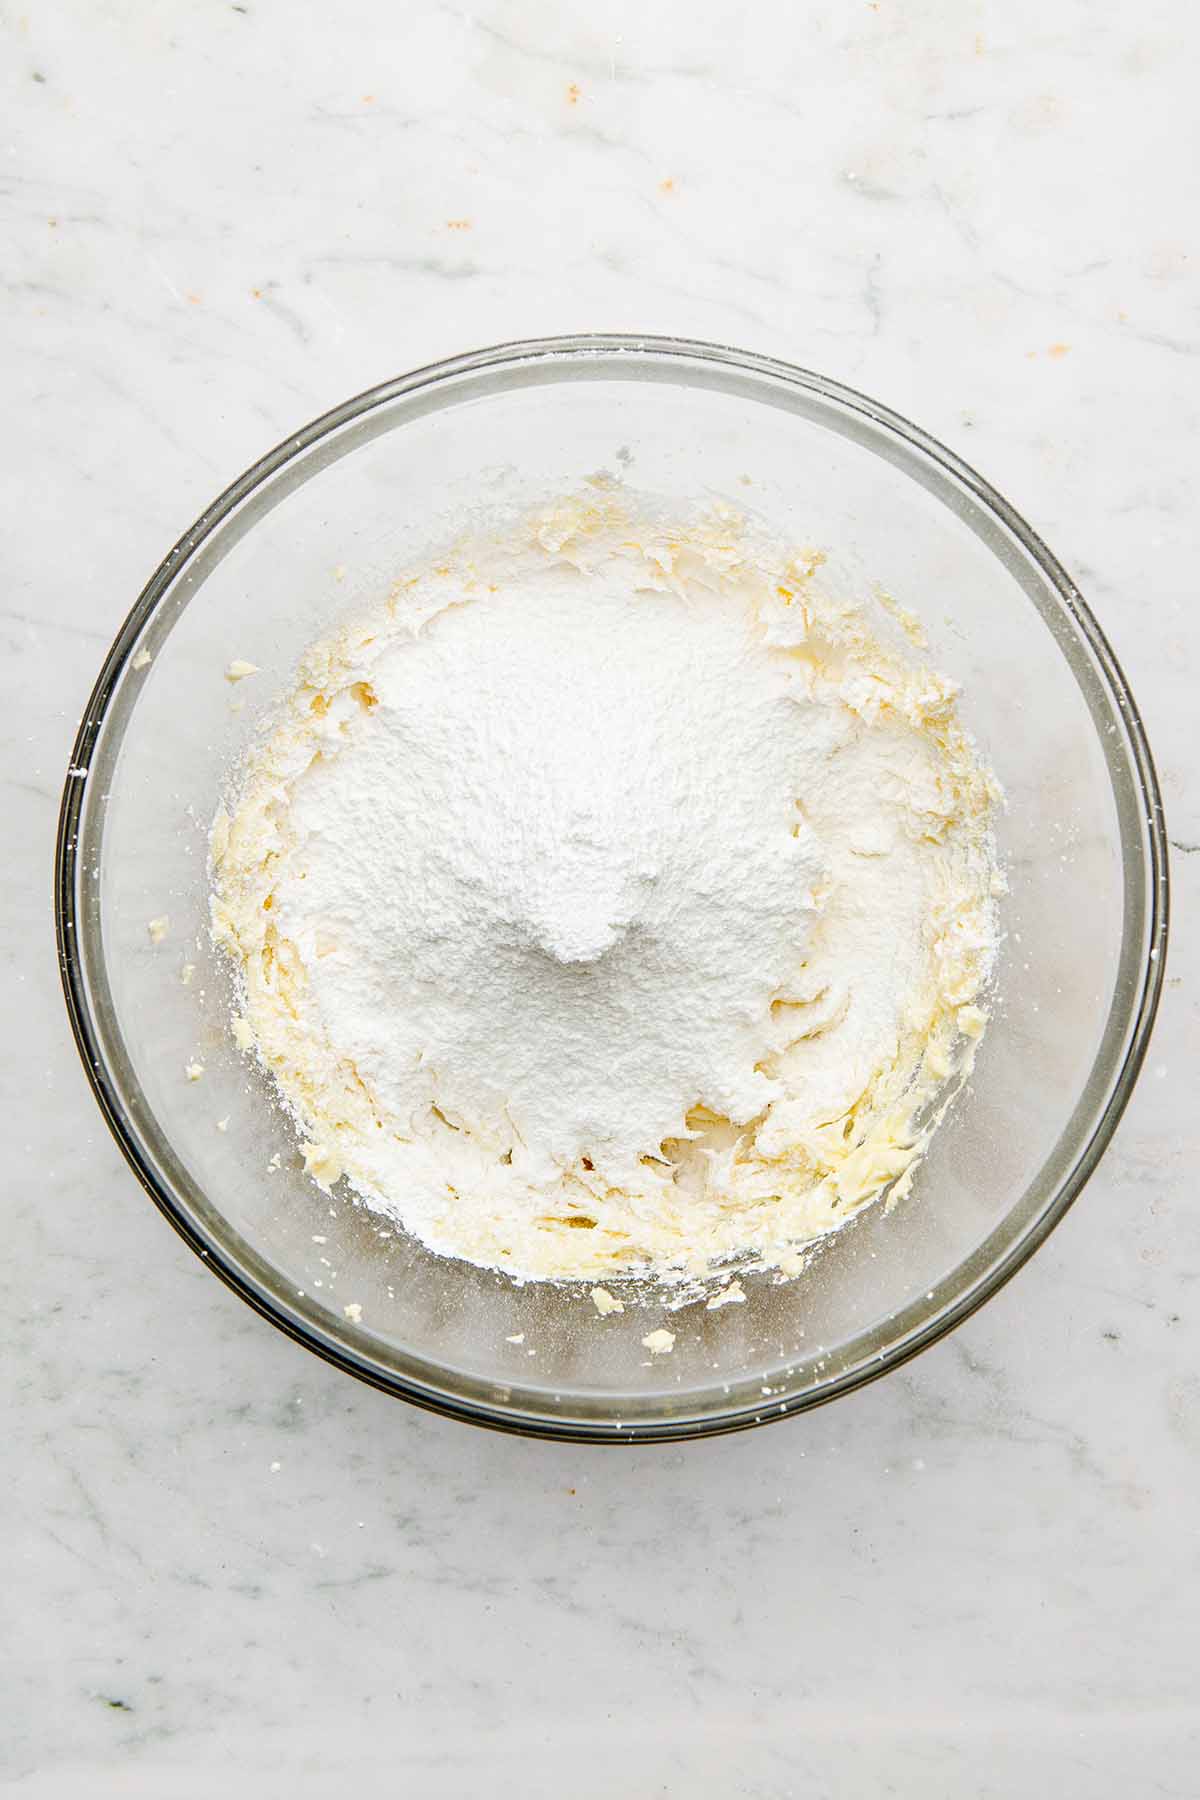 A pile of sieved powdered sugar inside a large glass bowl of whipped butter.